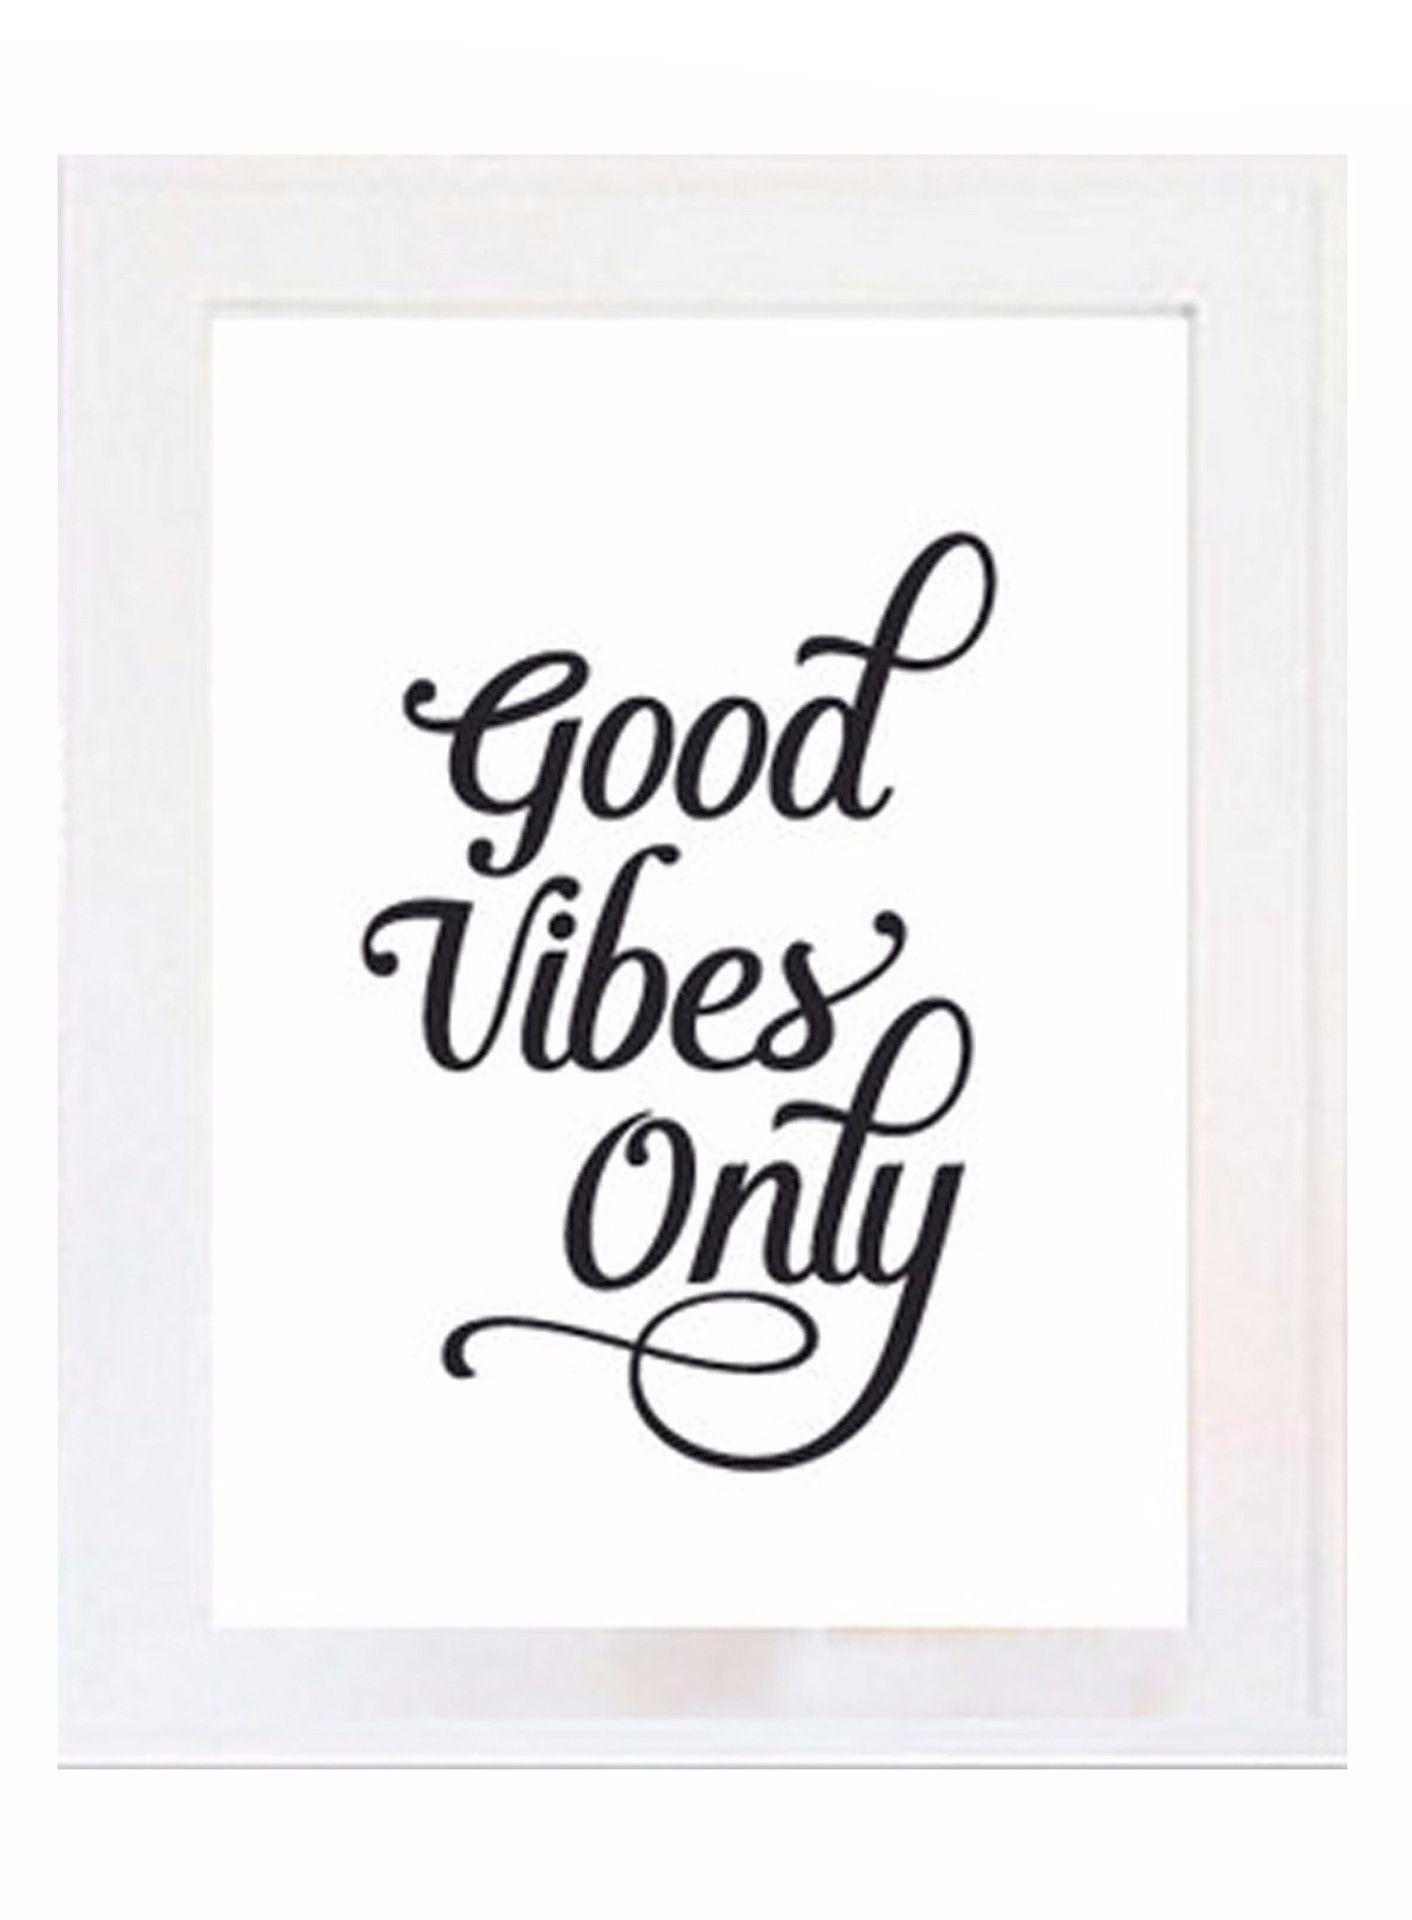 Showing posts & media for Good vibes city wallpaper